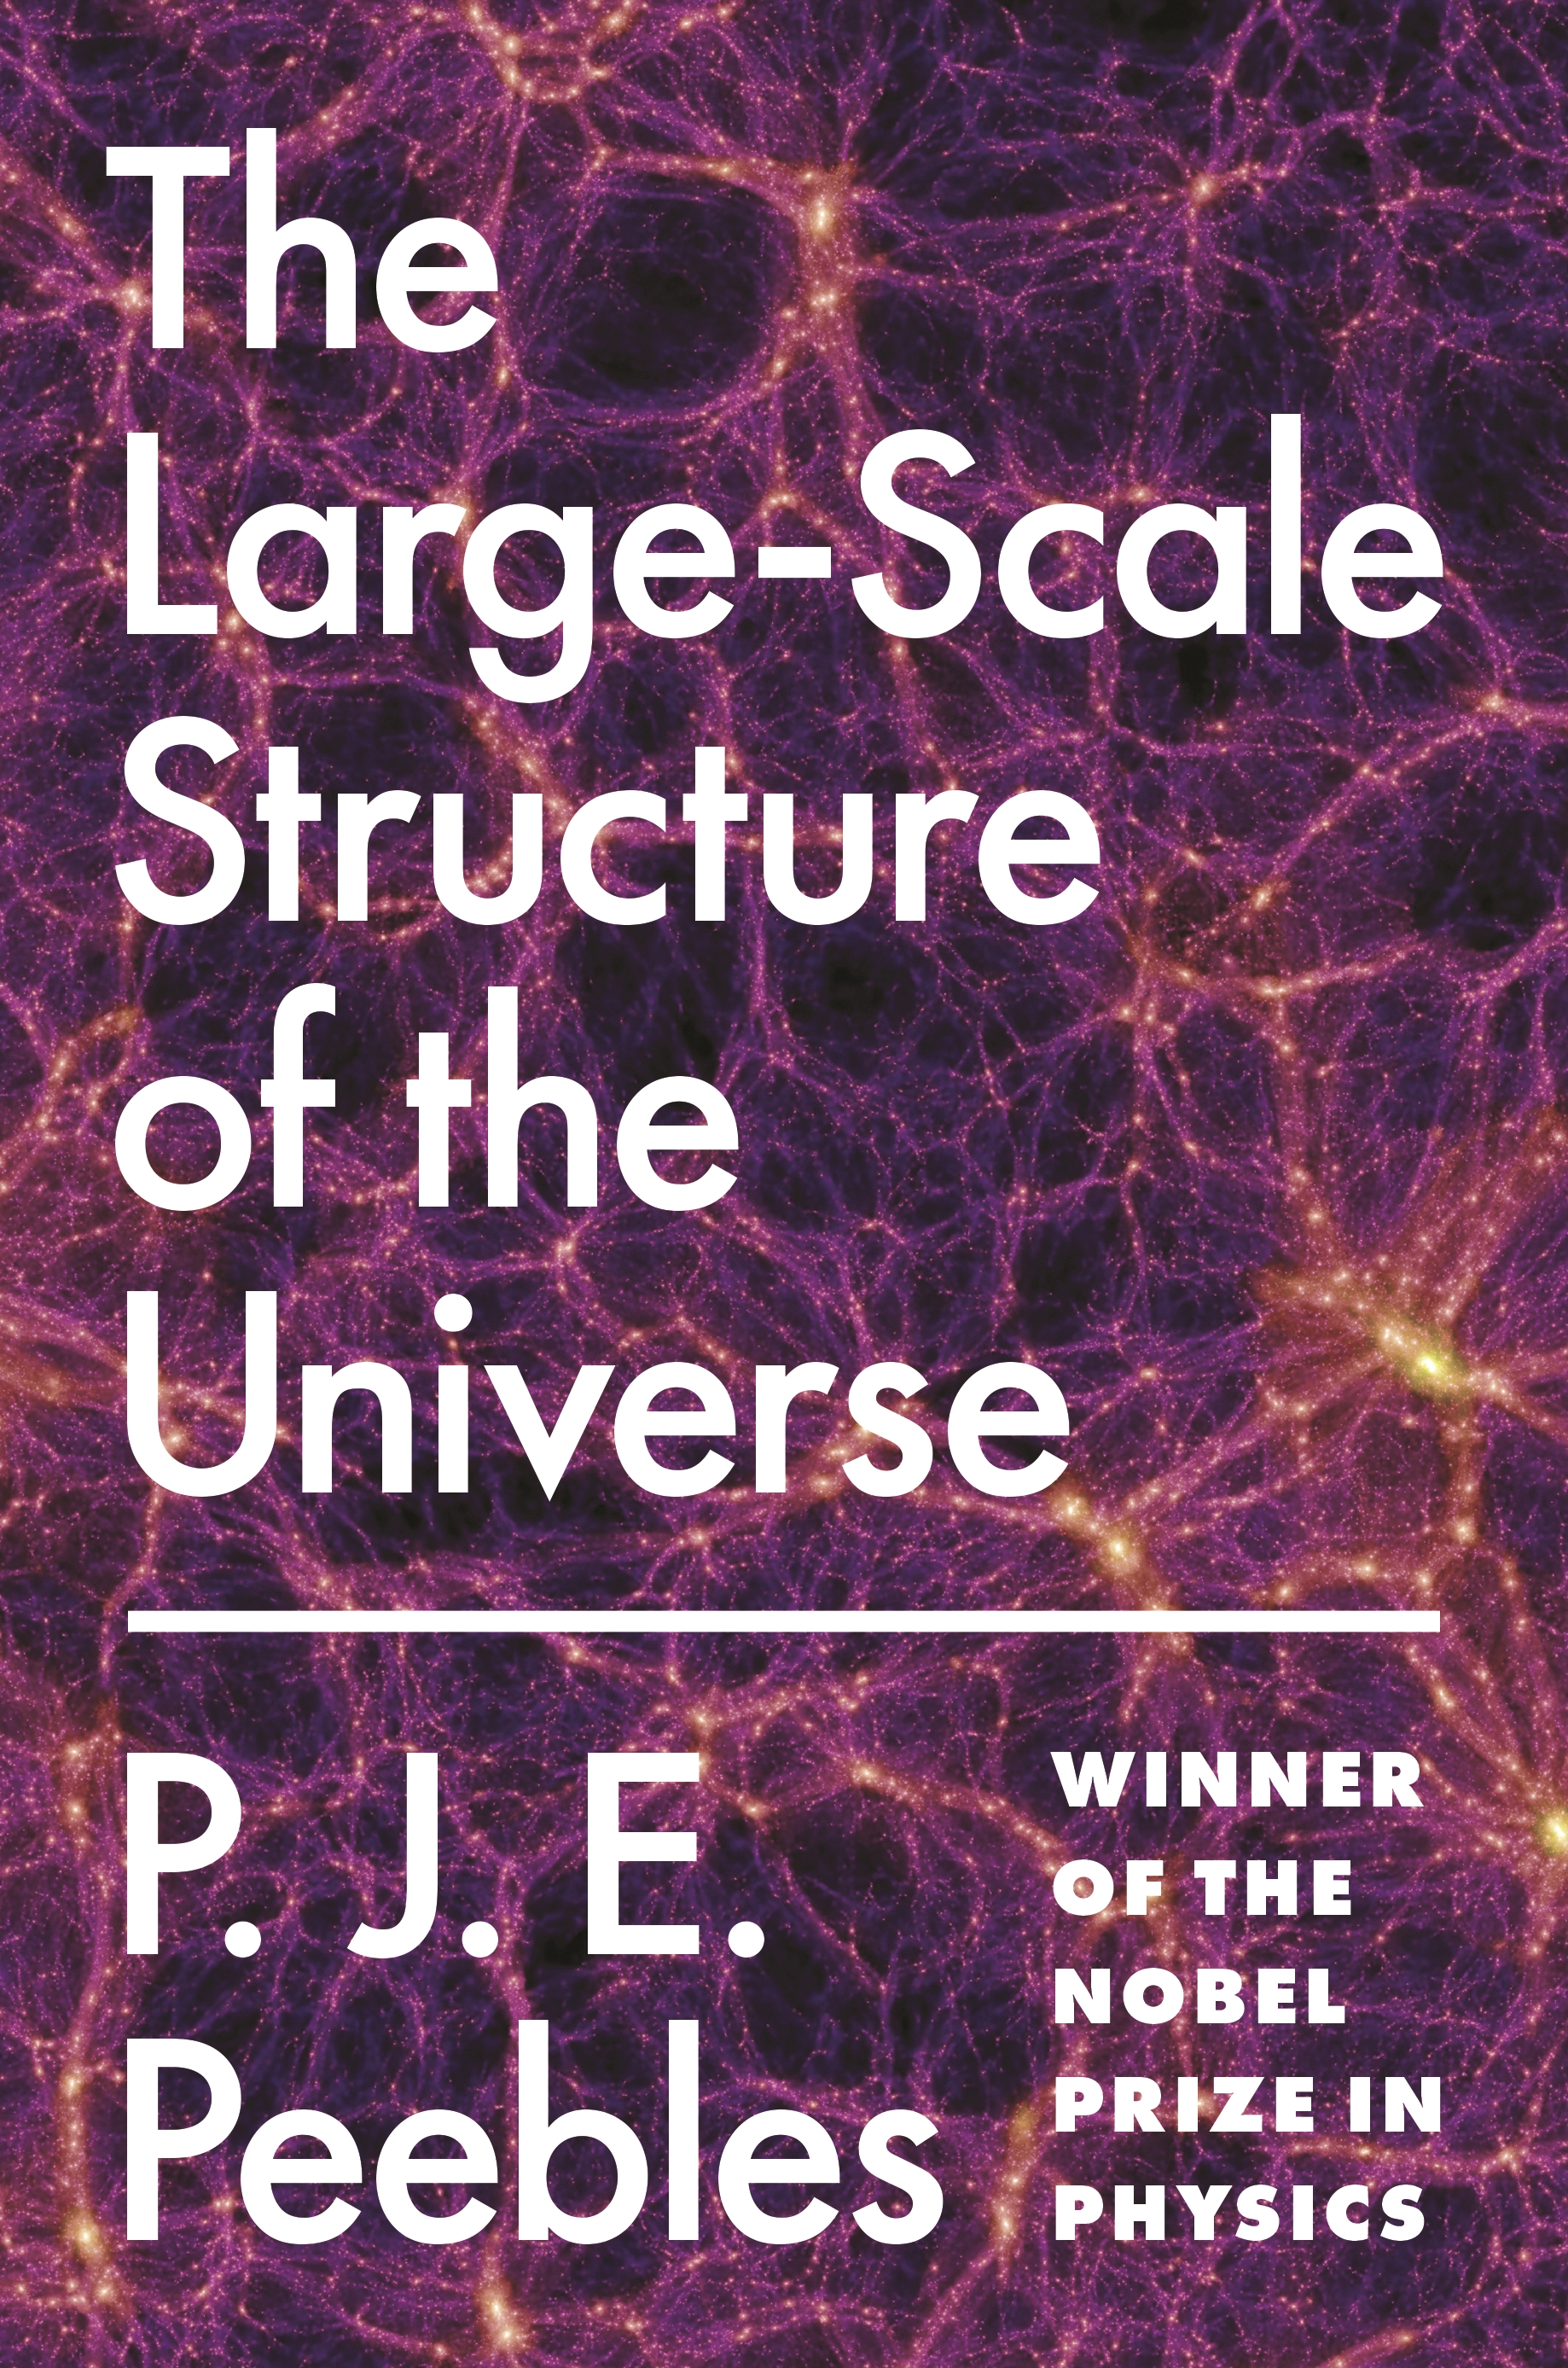 The Large Scale Structure of the Universe  Astronomy 801: Planets, Stars,  Galaxies, and the Universe